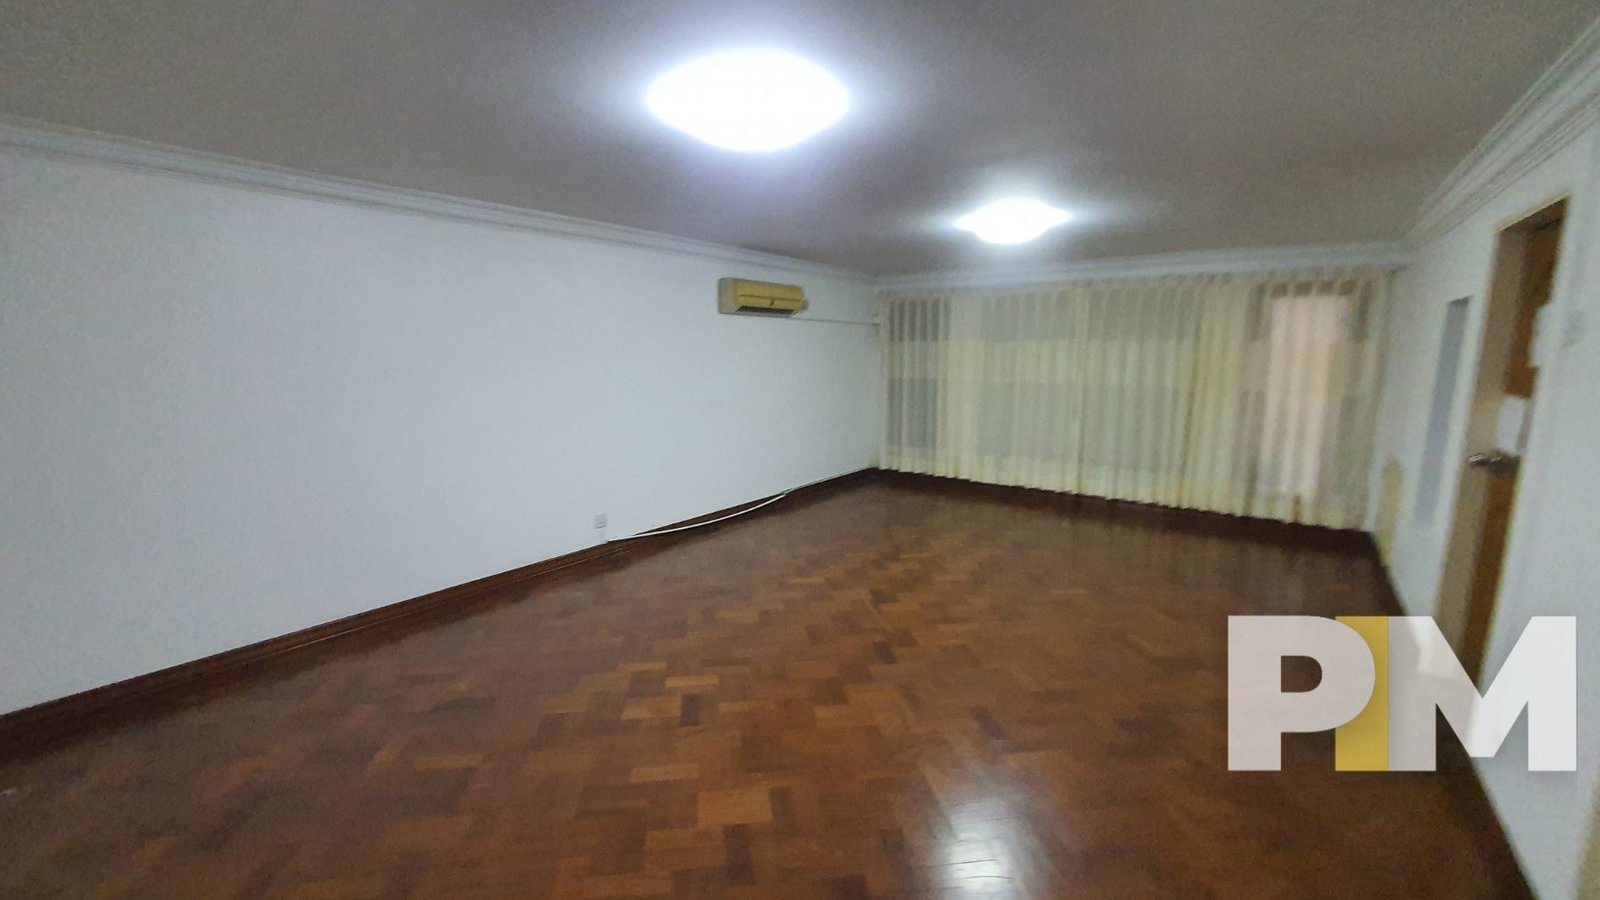 room with ceiling light - property in Myanmar